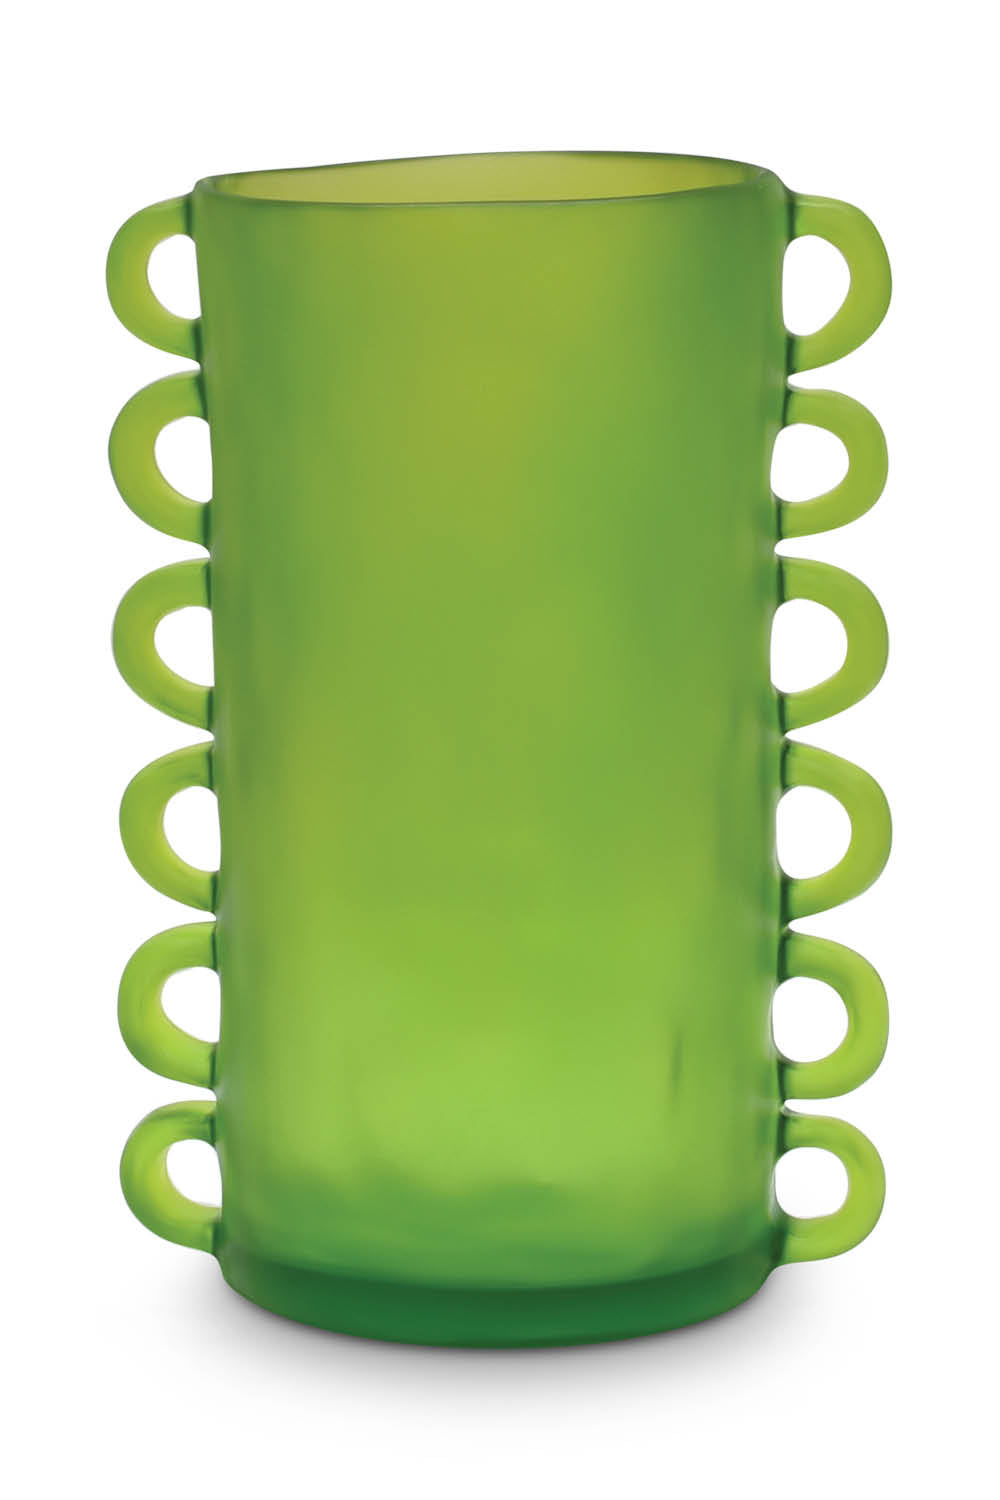 LOOPY Large Vase in Green